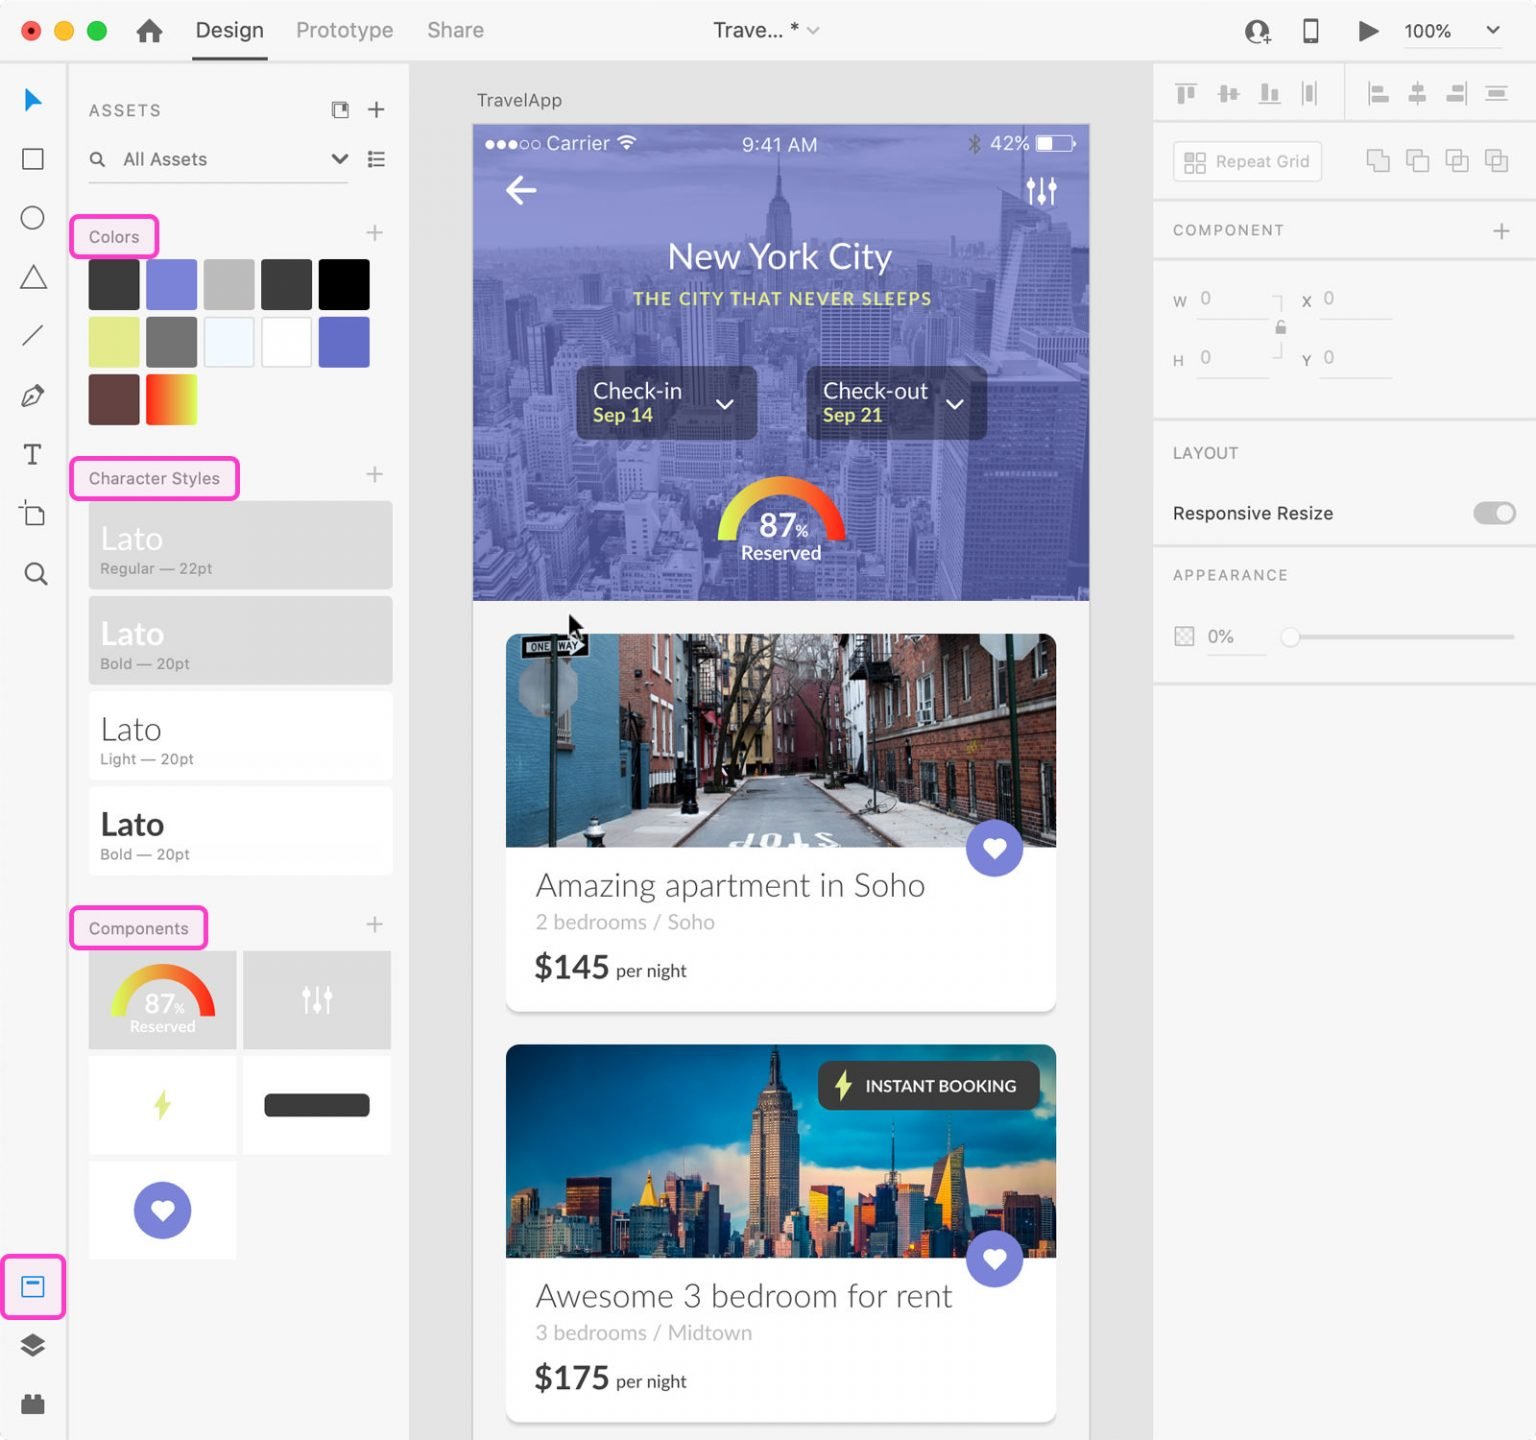 adobe xd download all assets